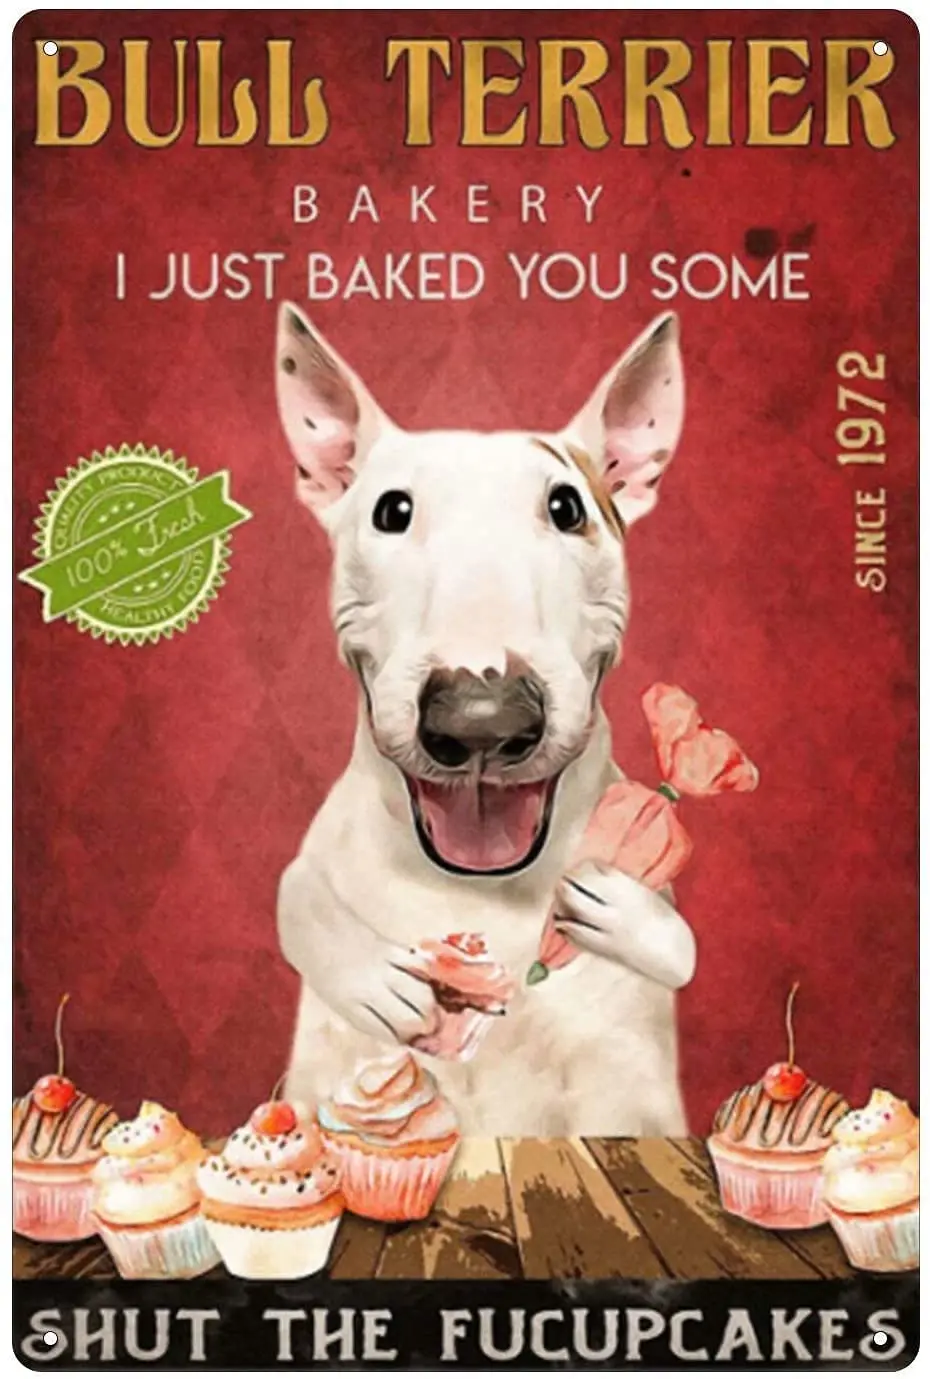 

Dog Tin Sign-Bull Terrier Bakery I Just Baked You Some Shut The Such As Bars Cafes And Other Signs At home wall decoration